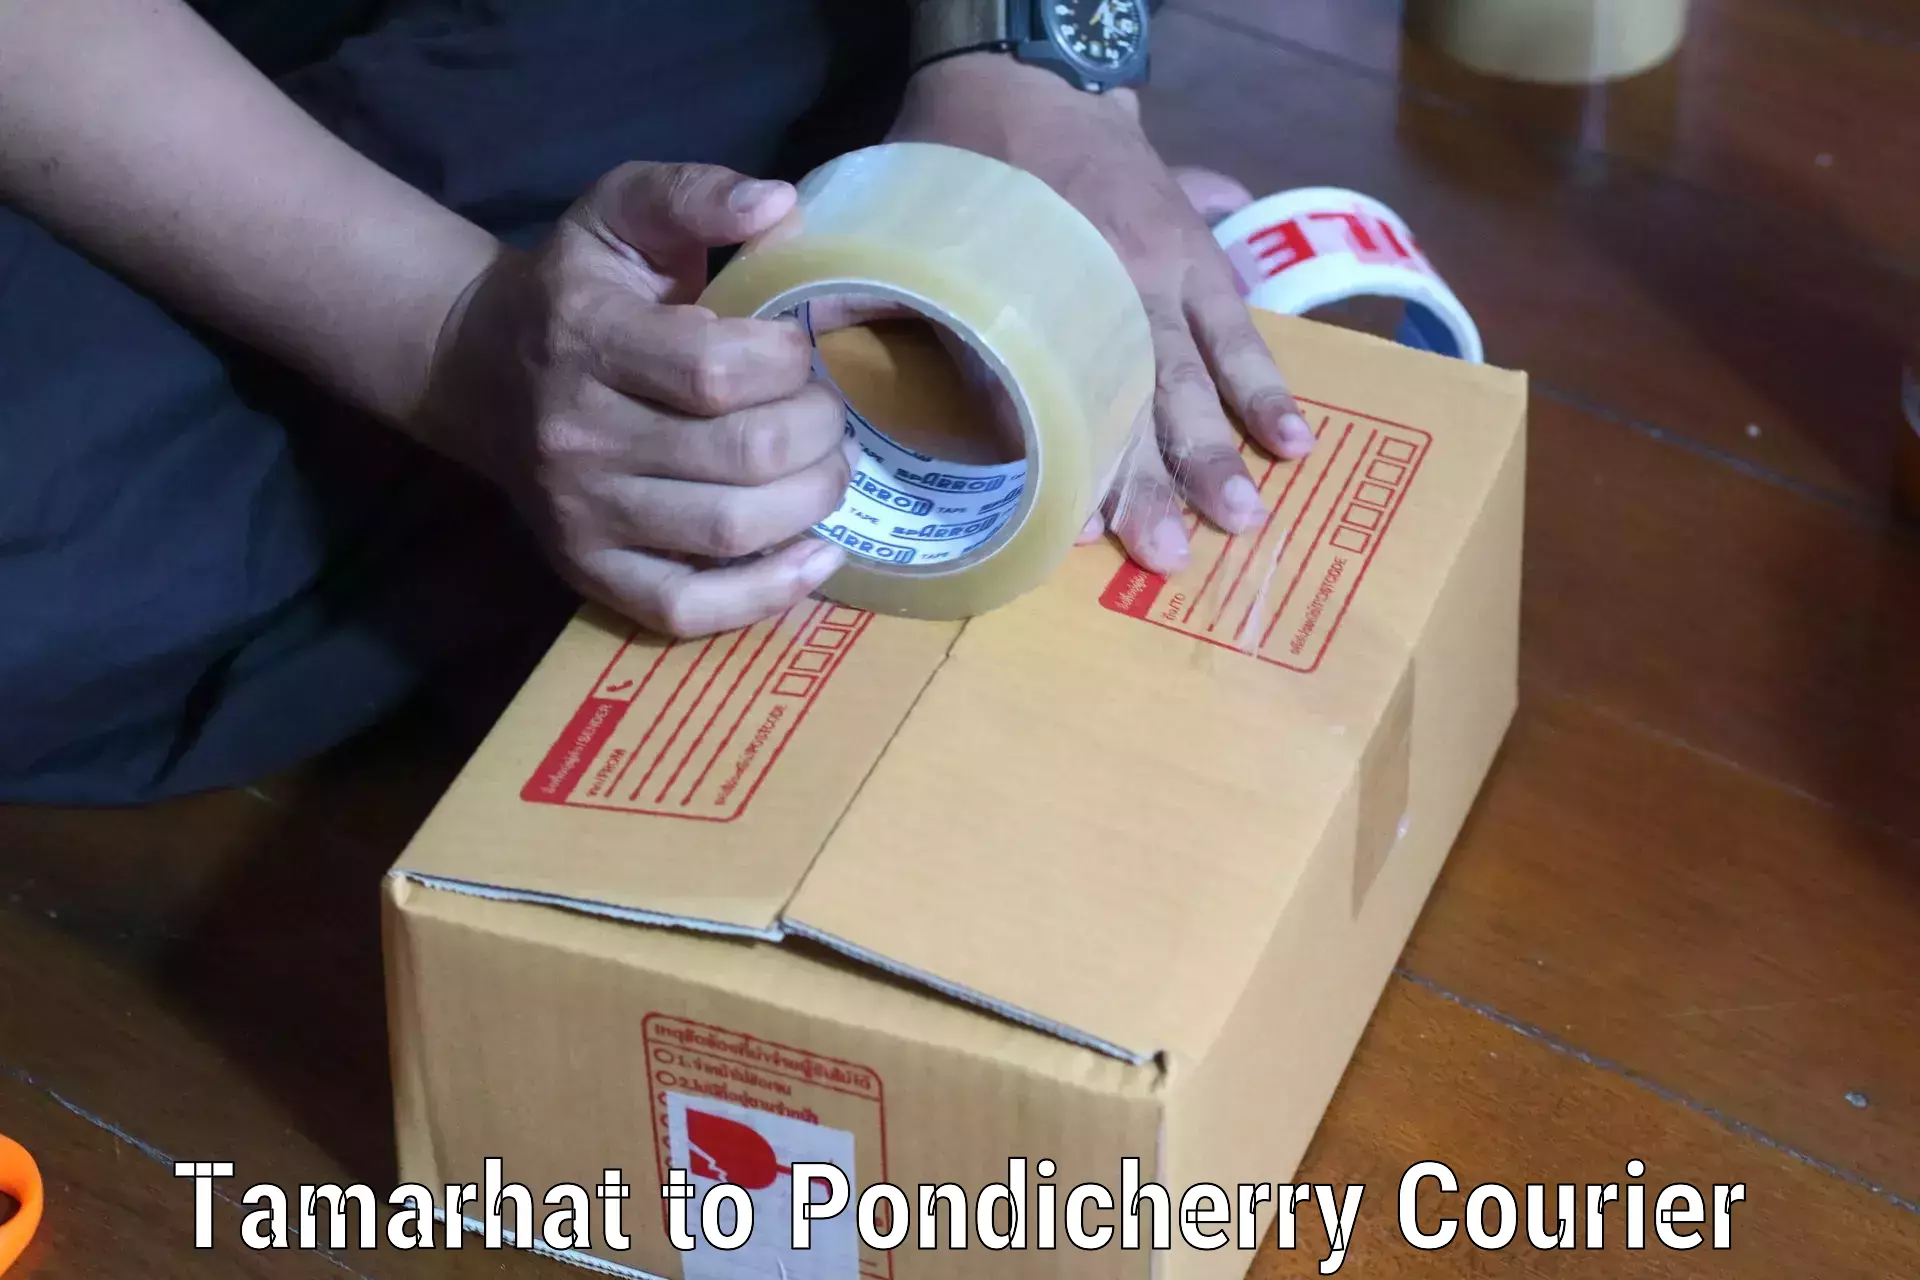 End-to-end delivery Tamarhat to Pondicherry University